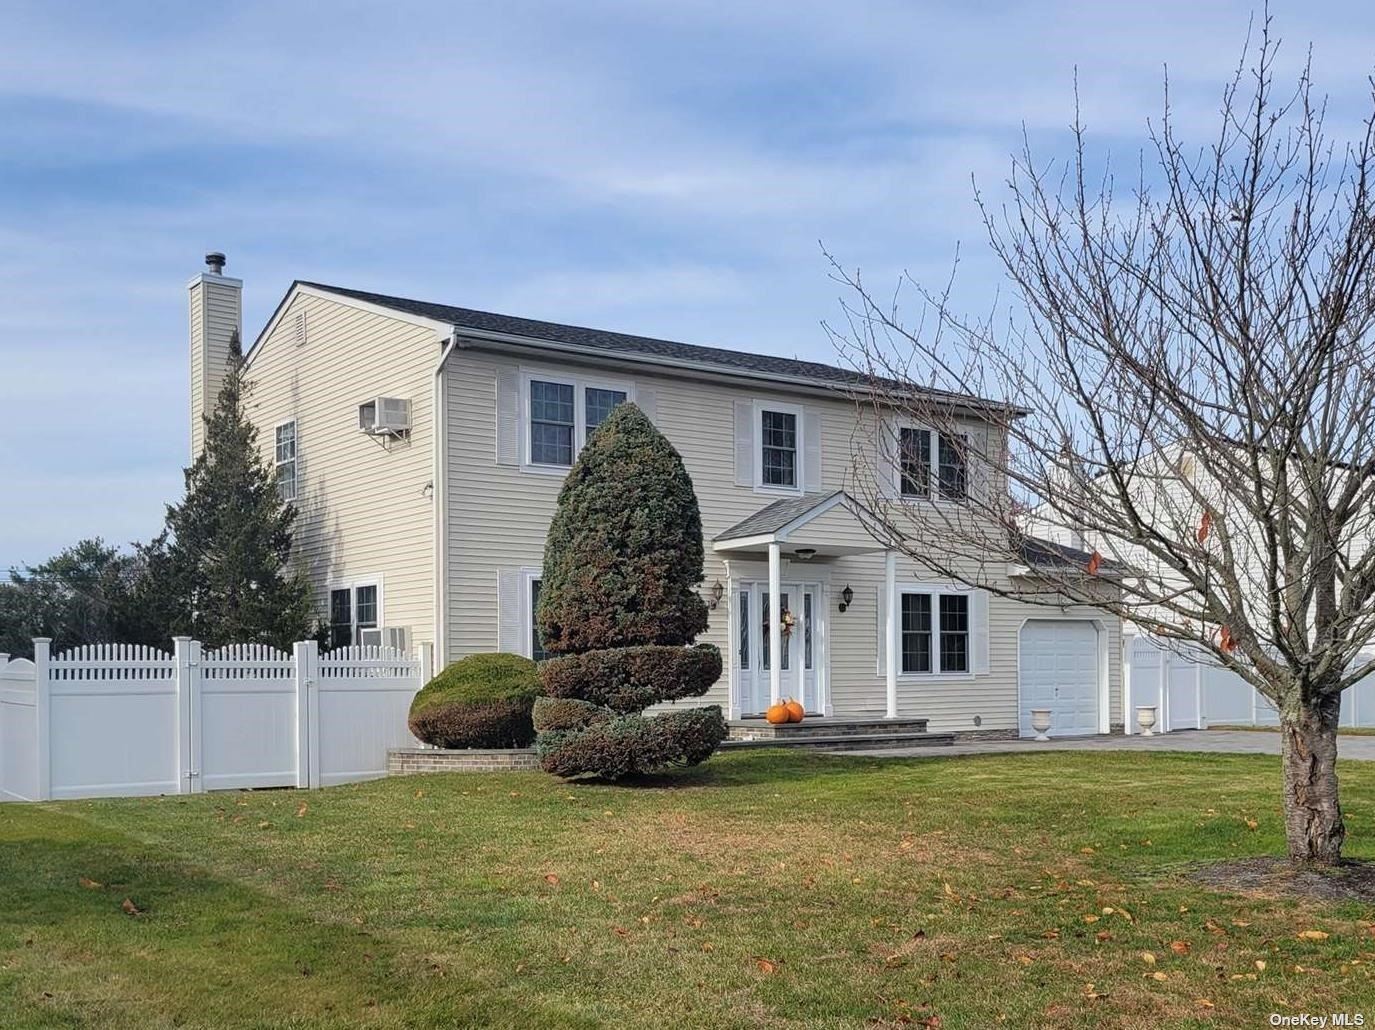 View Bellport, NY 11713 house